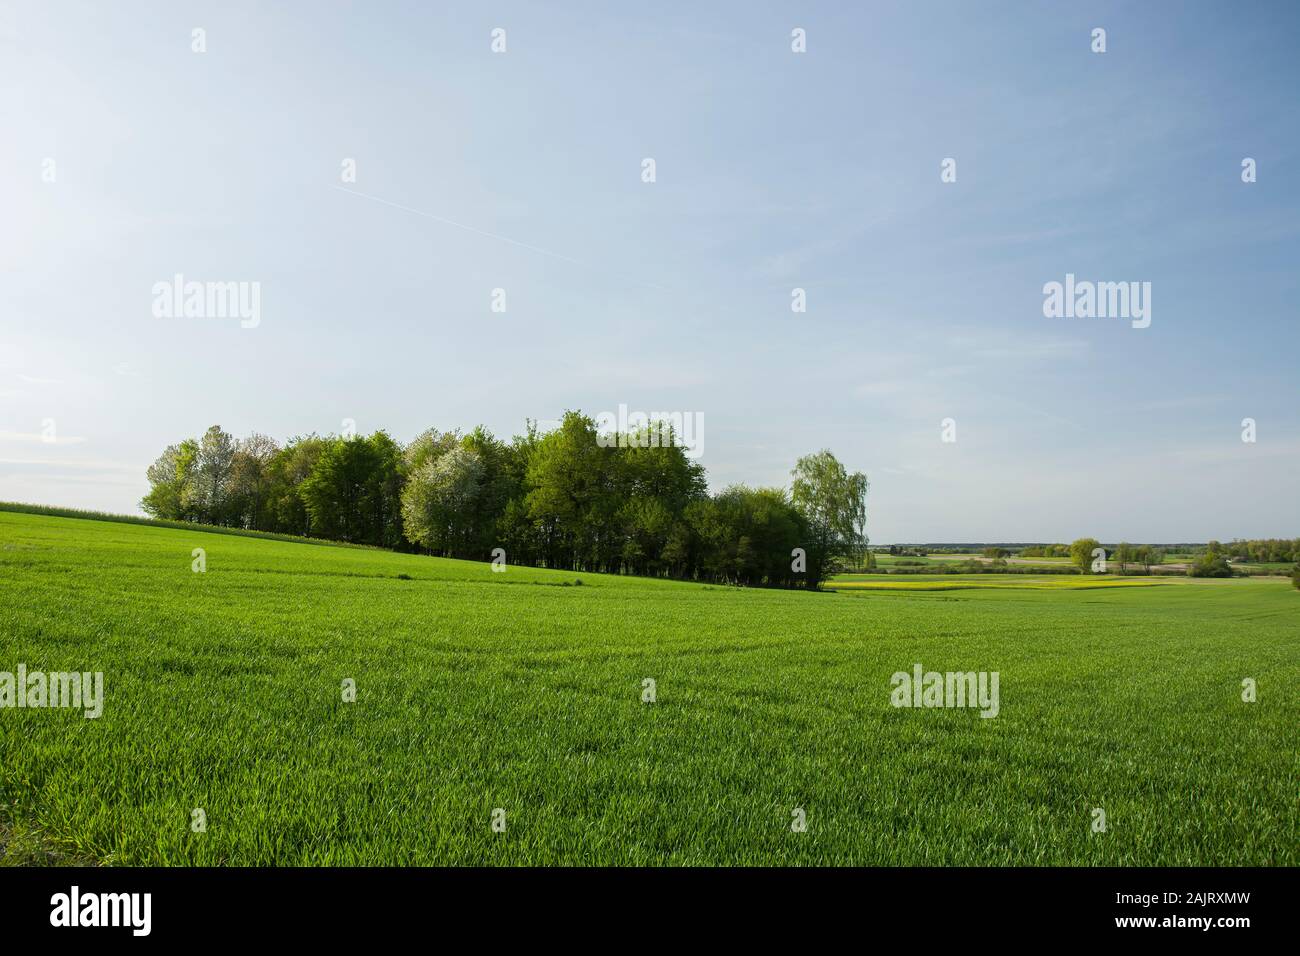 A group of trees in the meadow Stock Photo